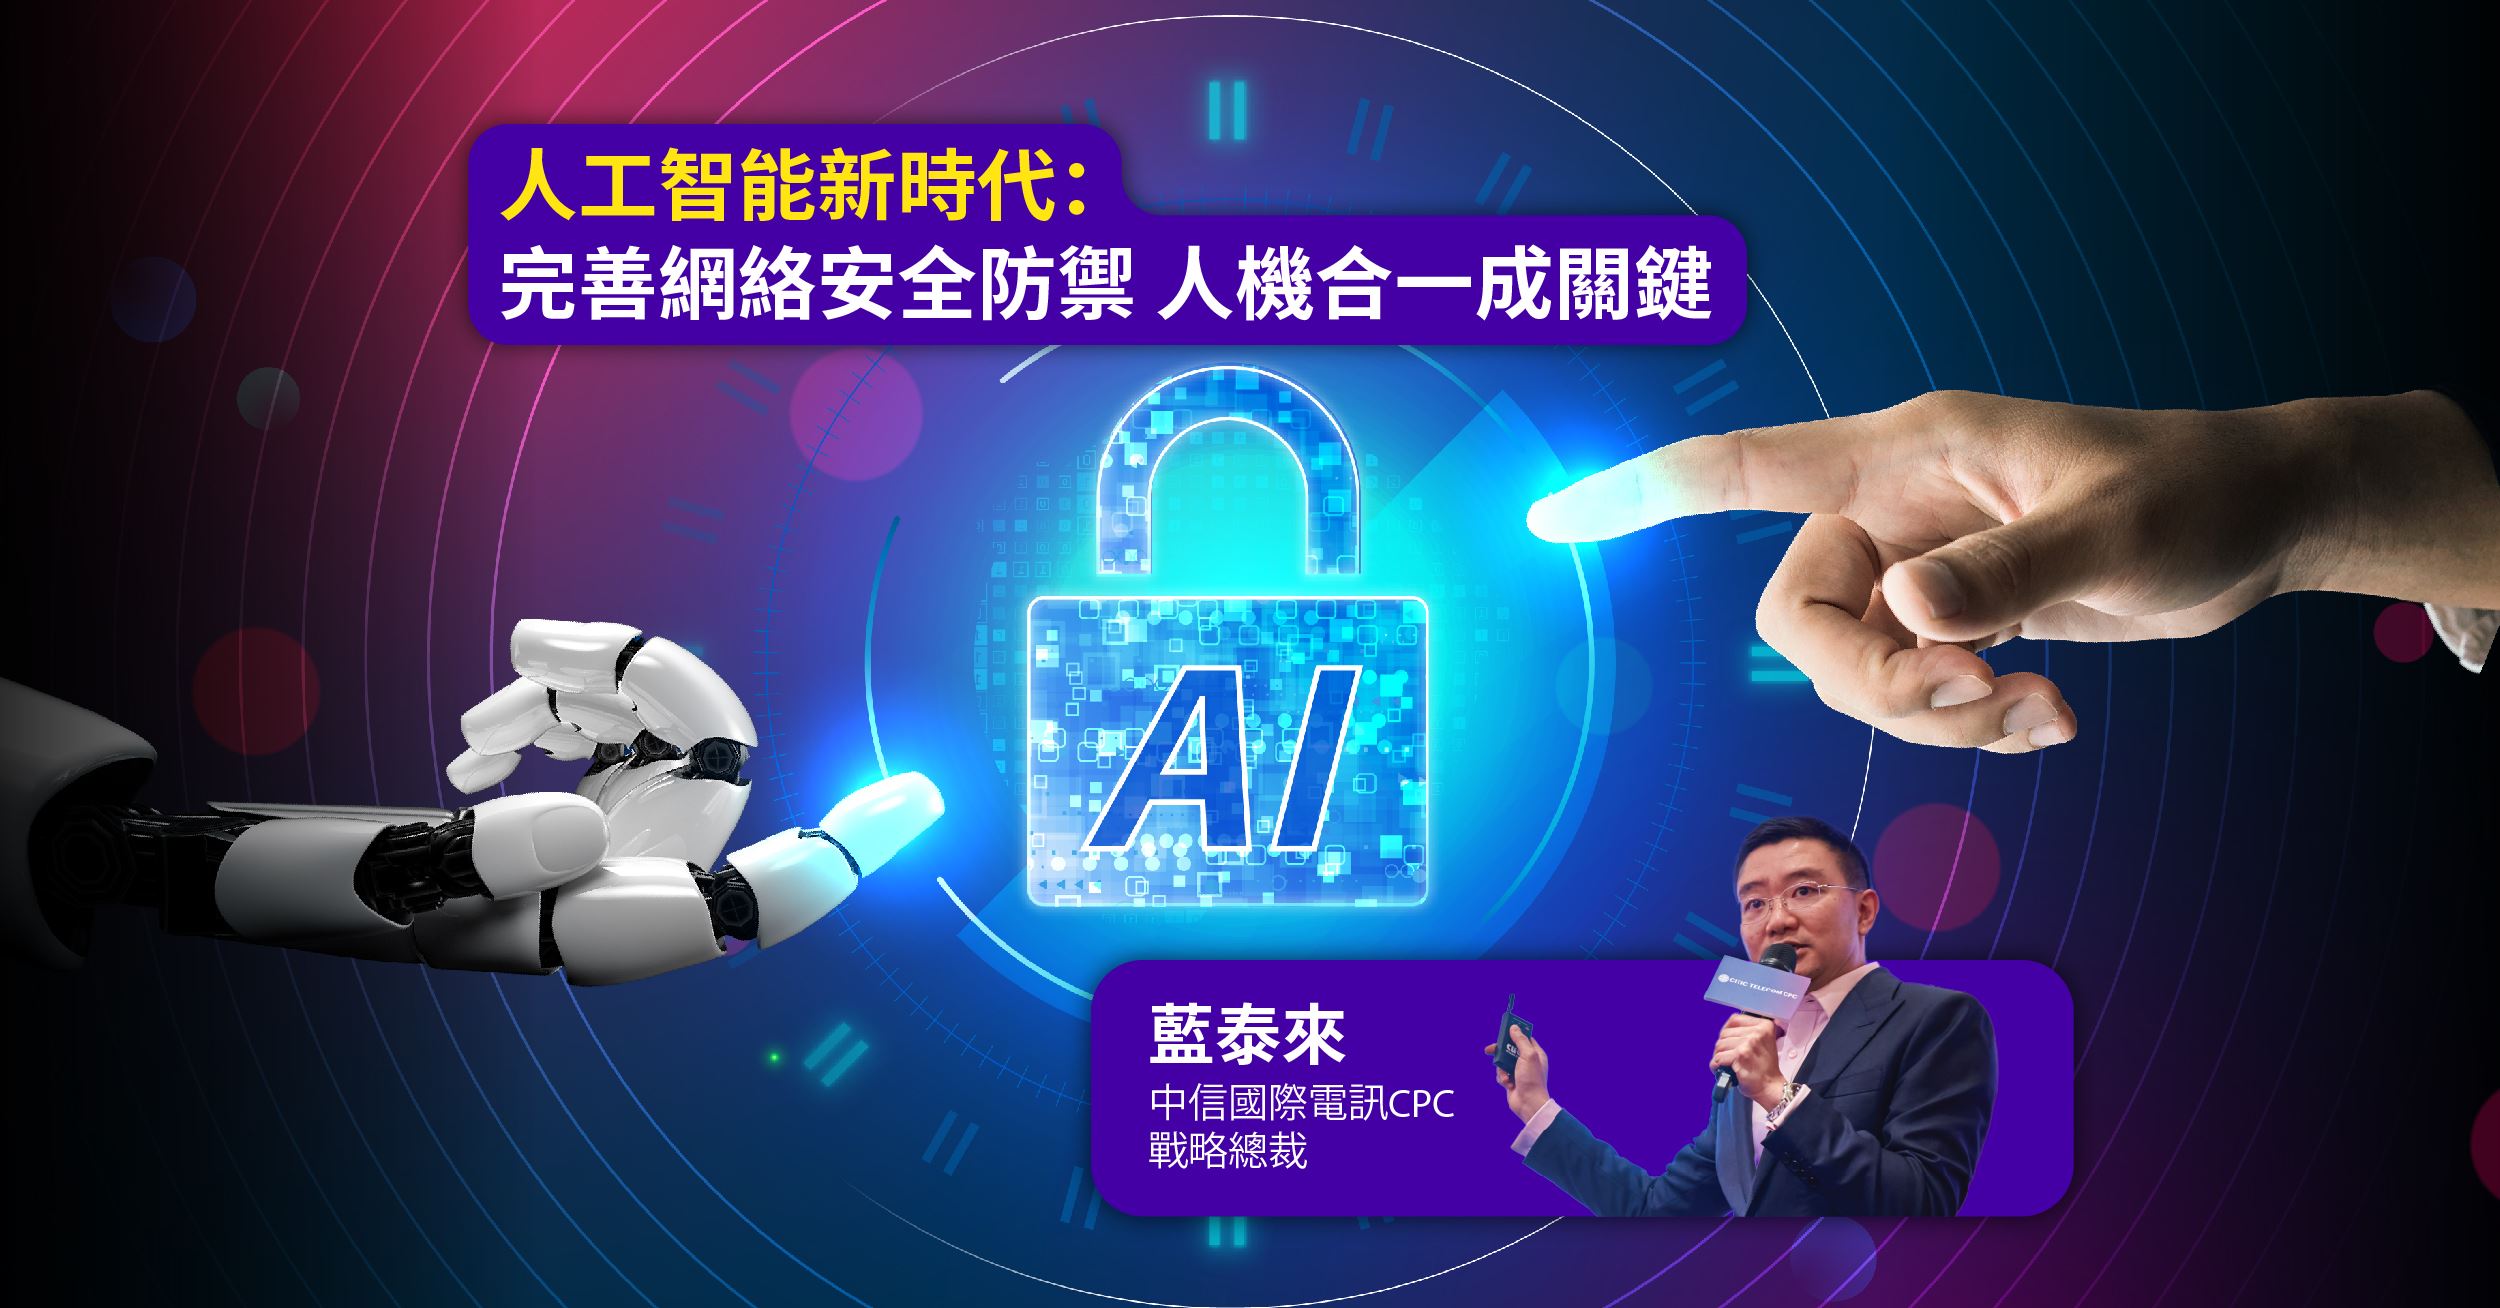 wepro180 | AI in the New Era: Enhancing Cybersecurity Defense through Human-Machine Collaboration (Chinese only)